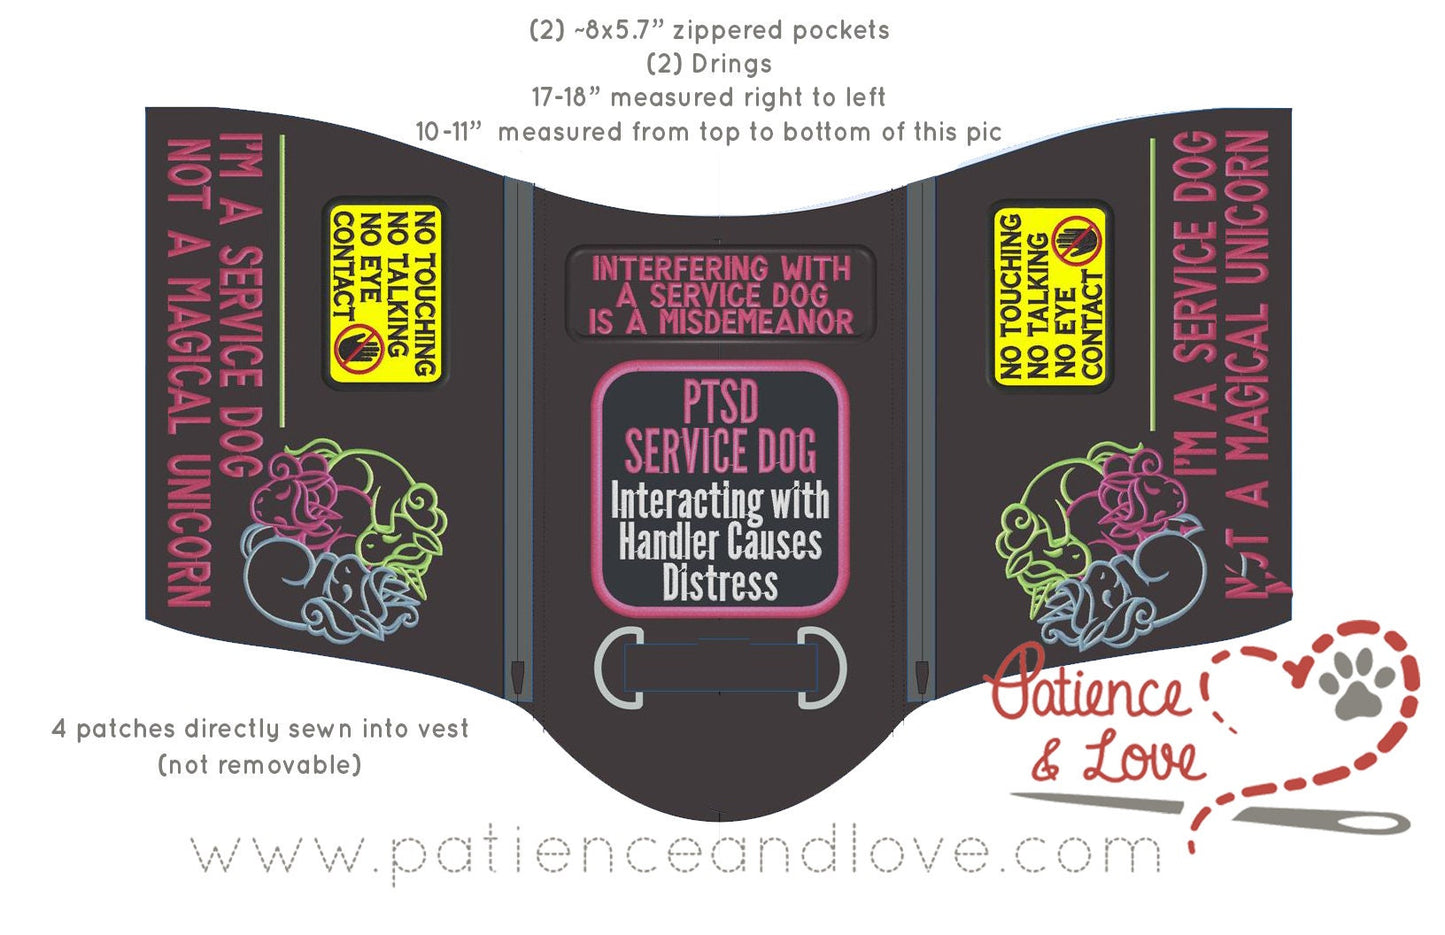 I'm A Service Dog, Not a Magical Unicorn with 4 patches and cute sleeping unicorns, S&R Style Embroidered Vest